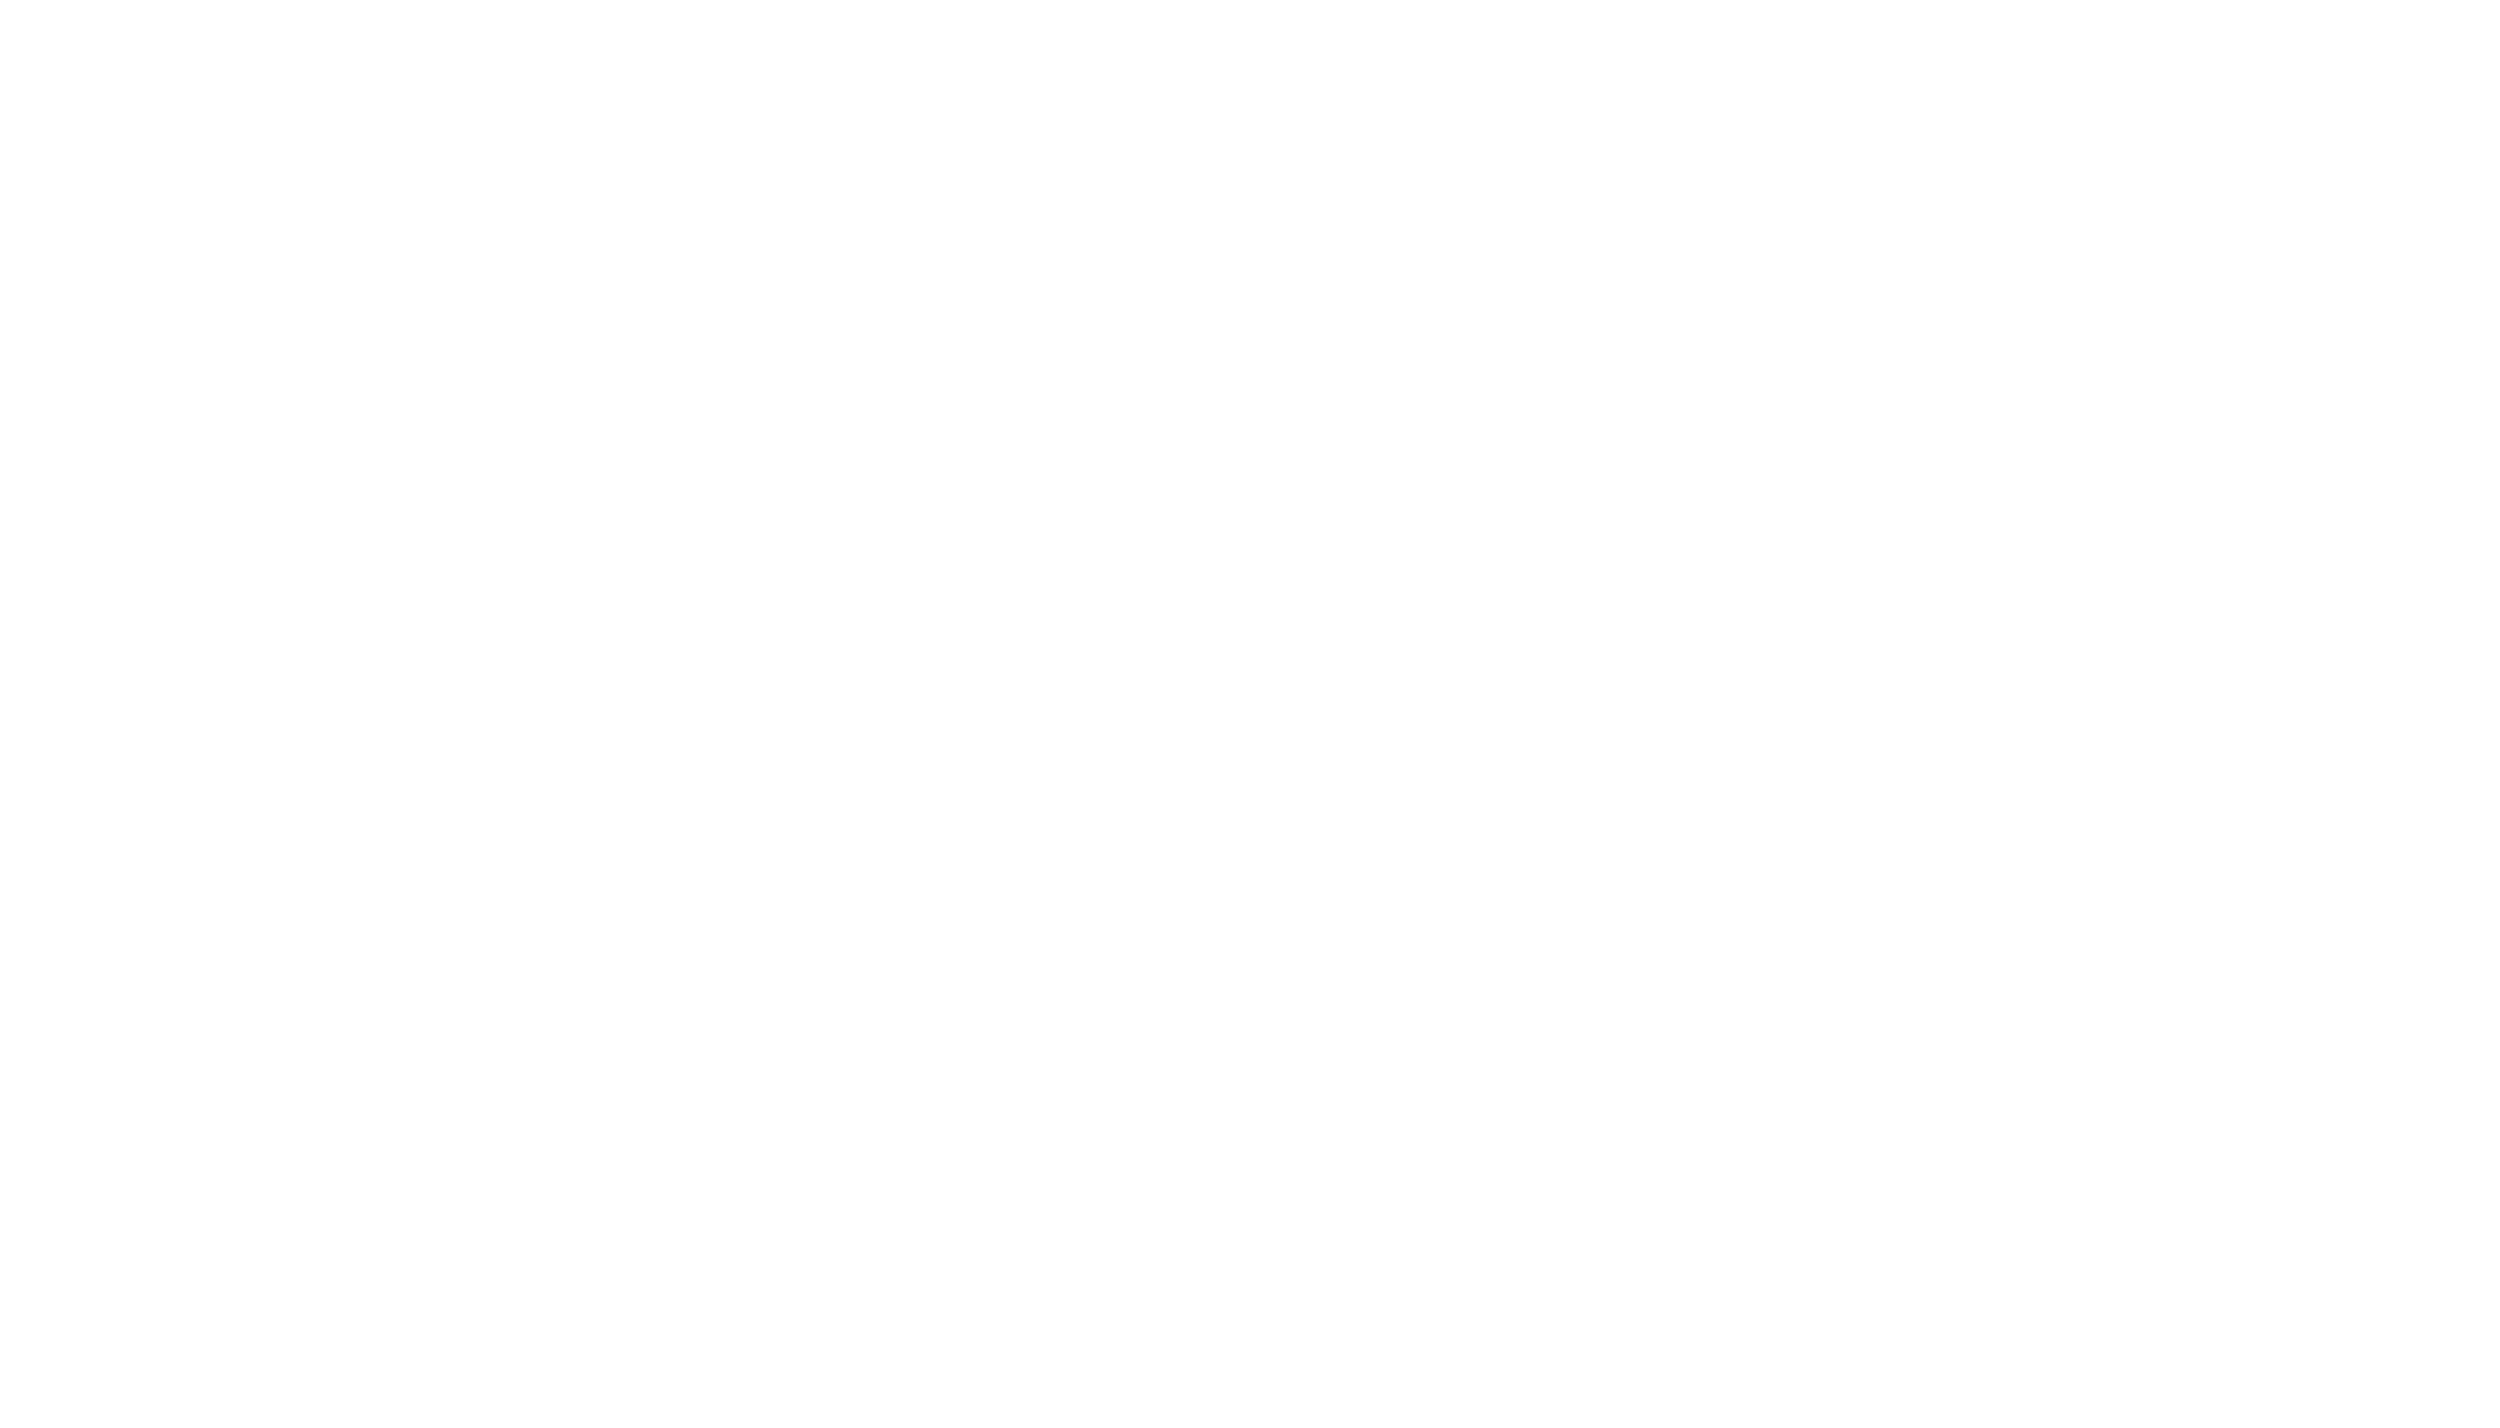 Leicester Changing Diabetes - Cities Changing Diabetes